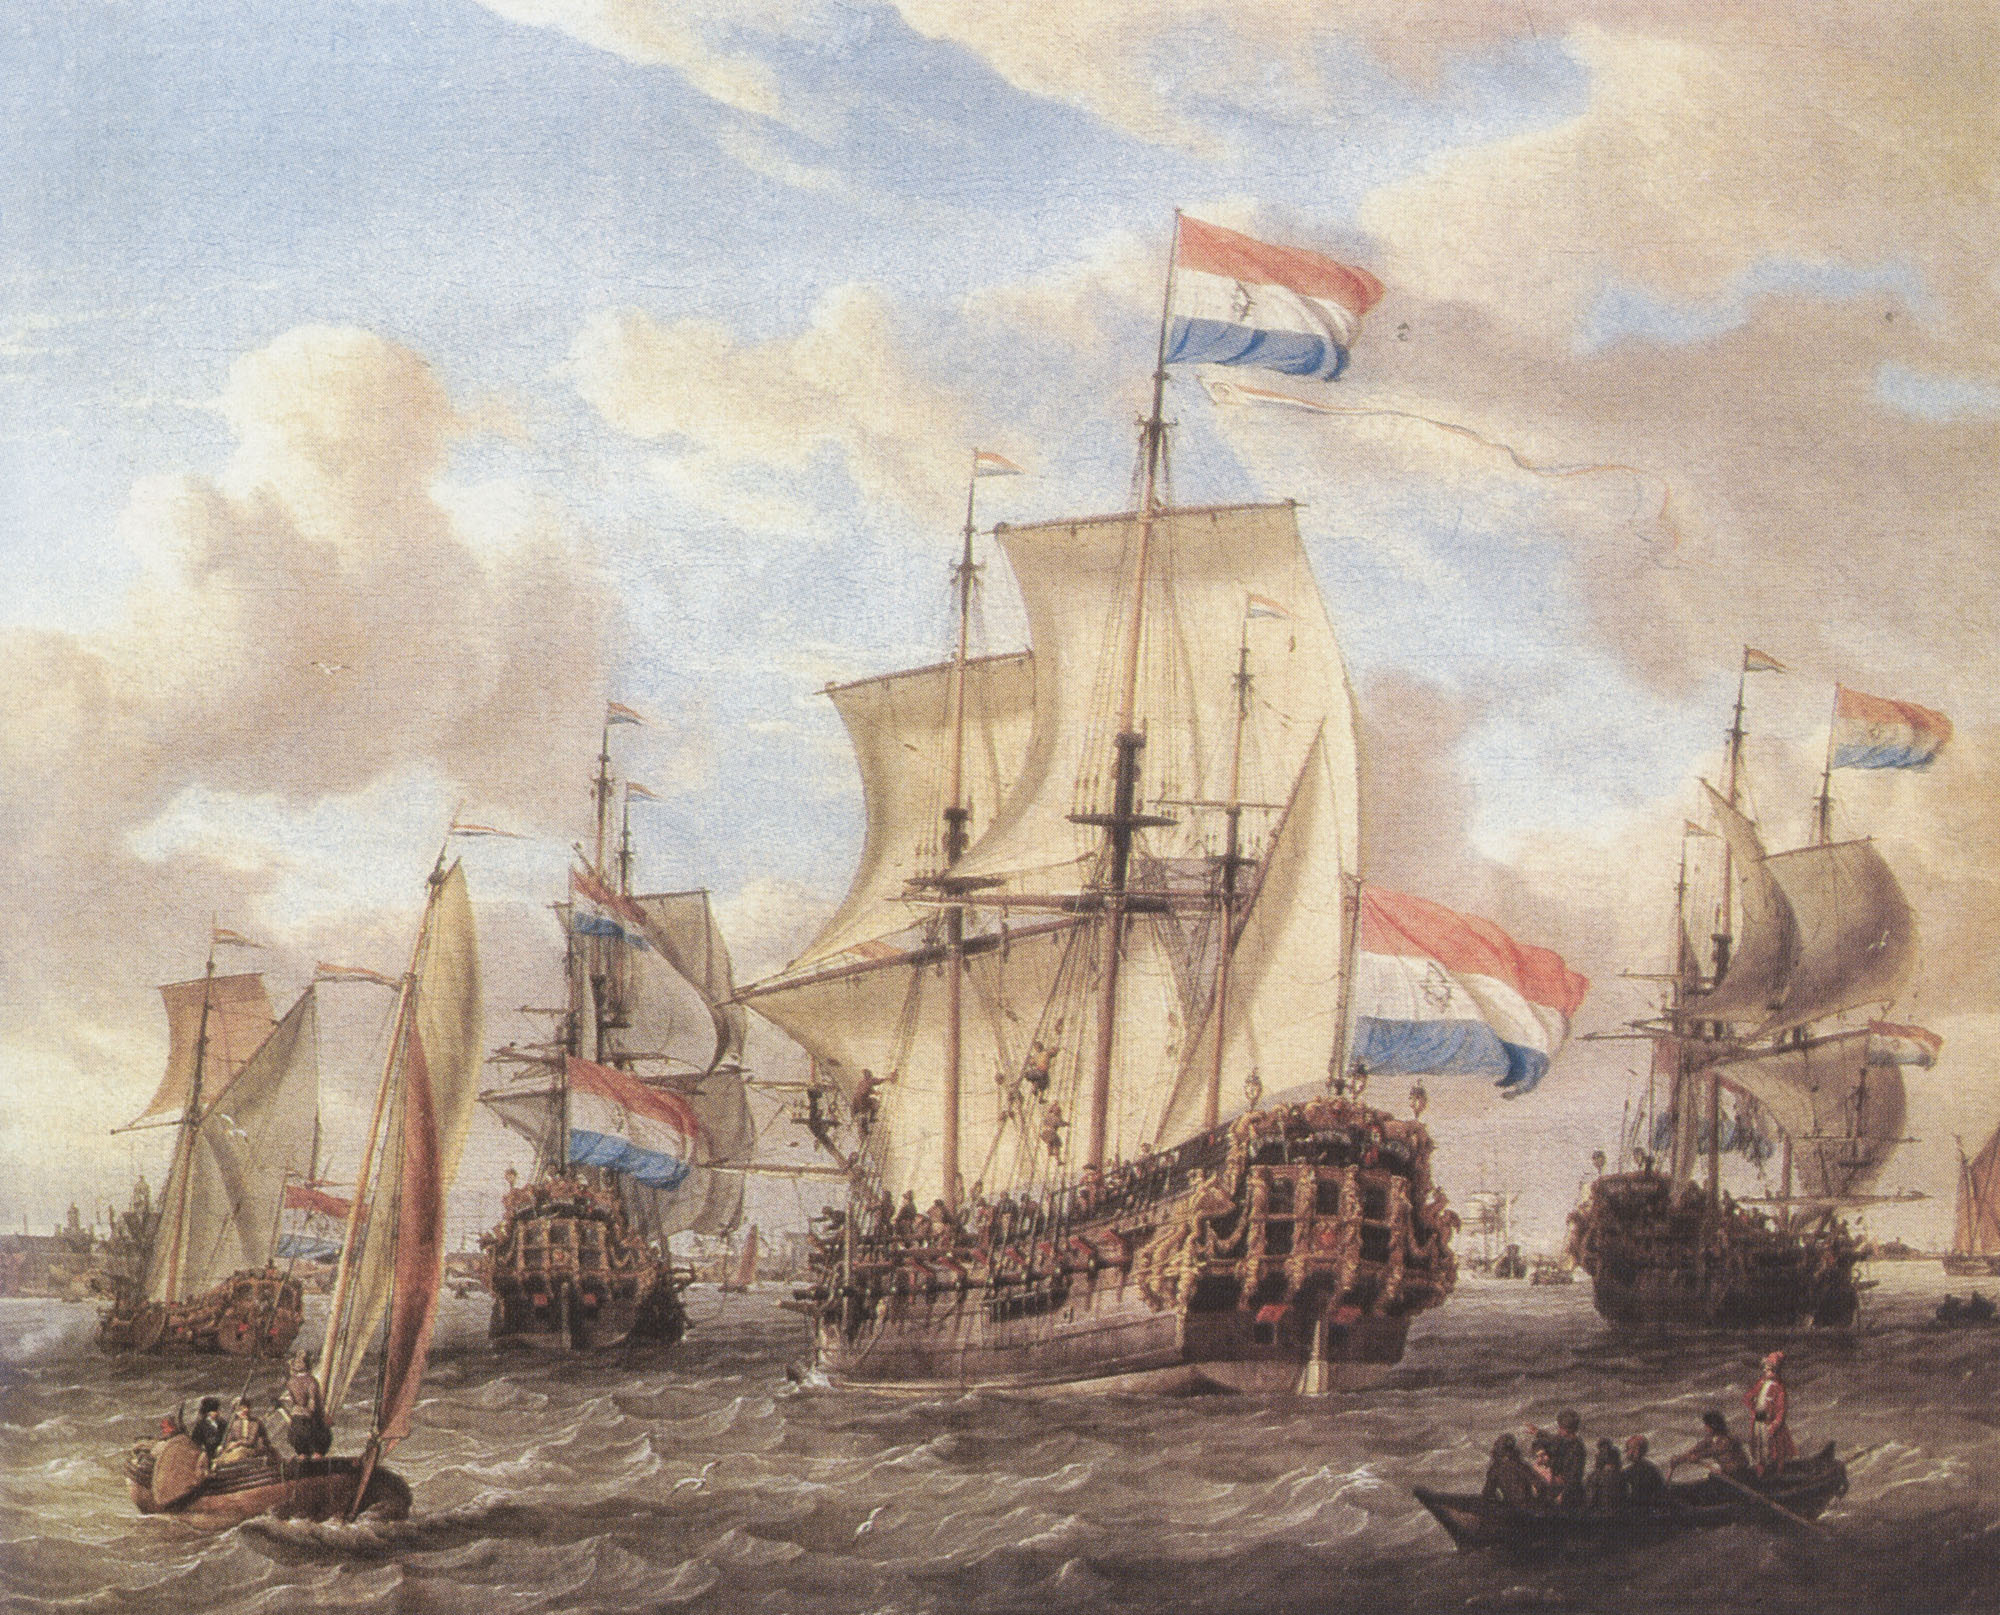 Painting of the St Paul, built in Arkhangelsk in 1694